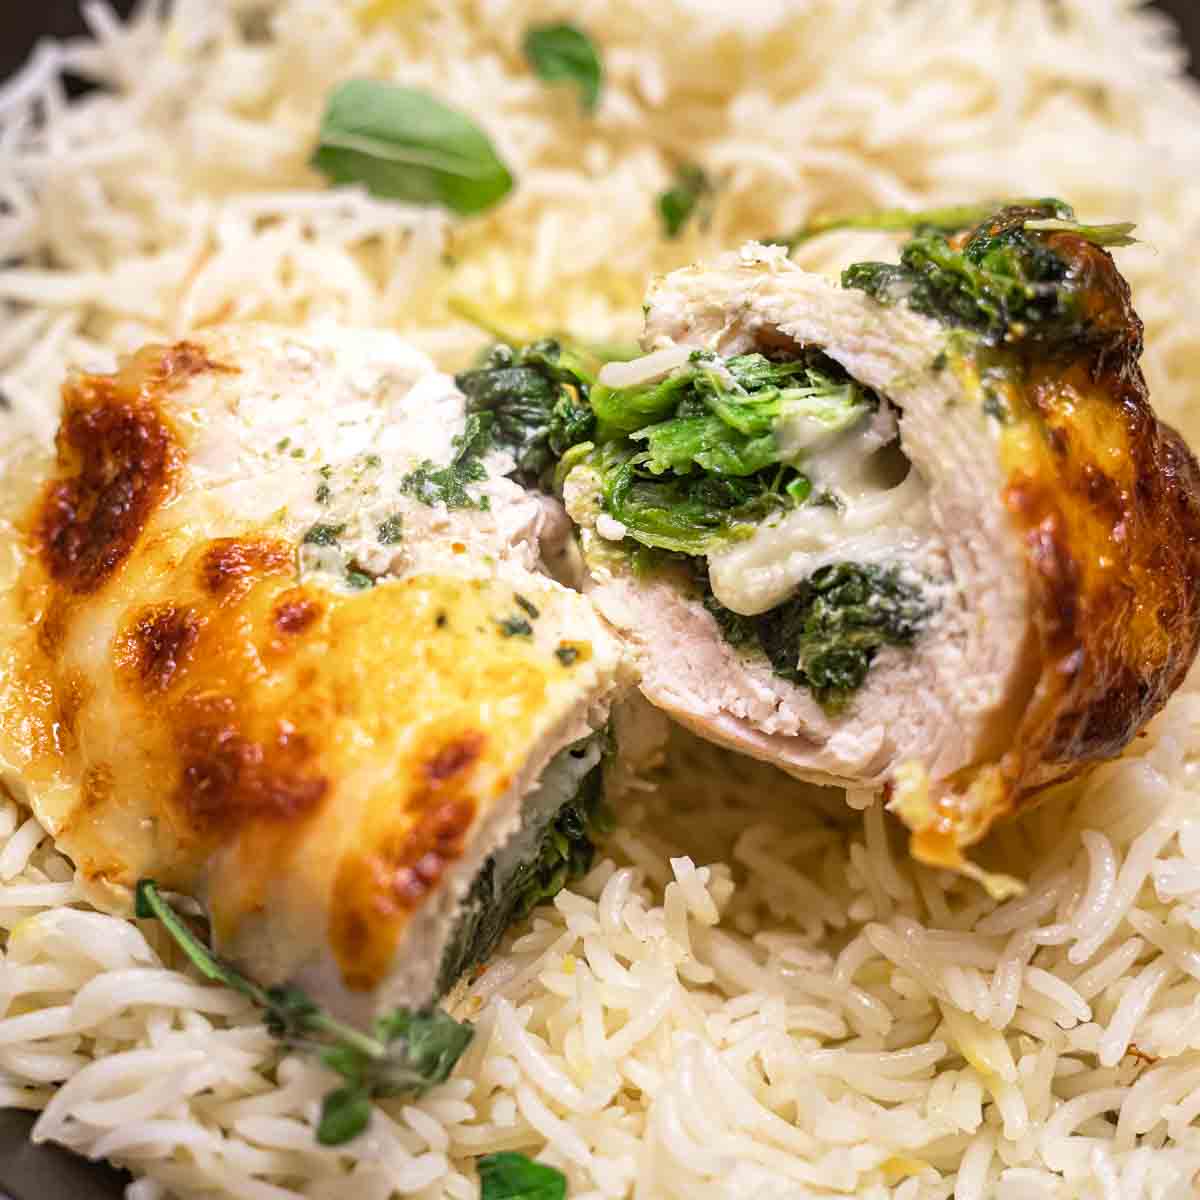 Chicken stuffed with spinach and cheese on rice.